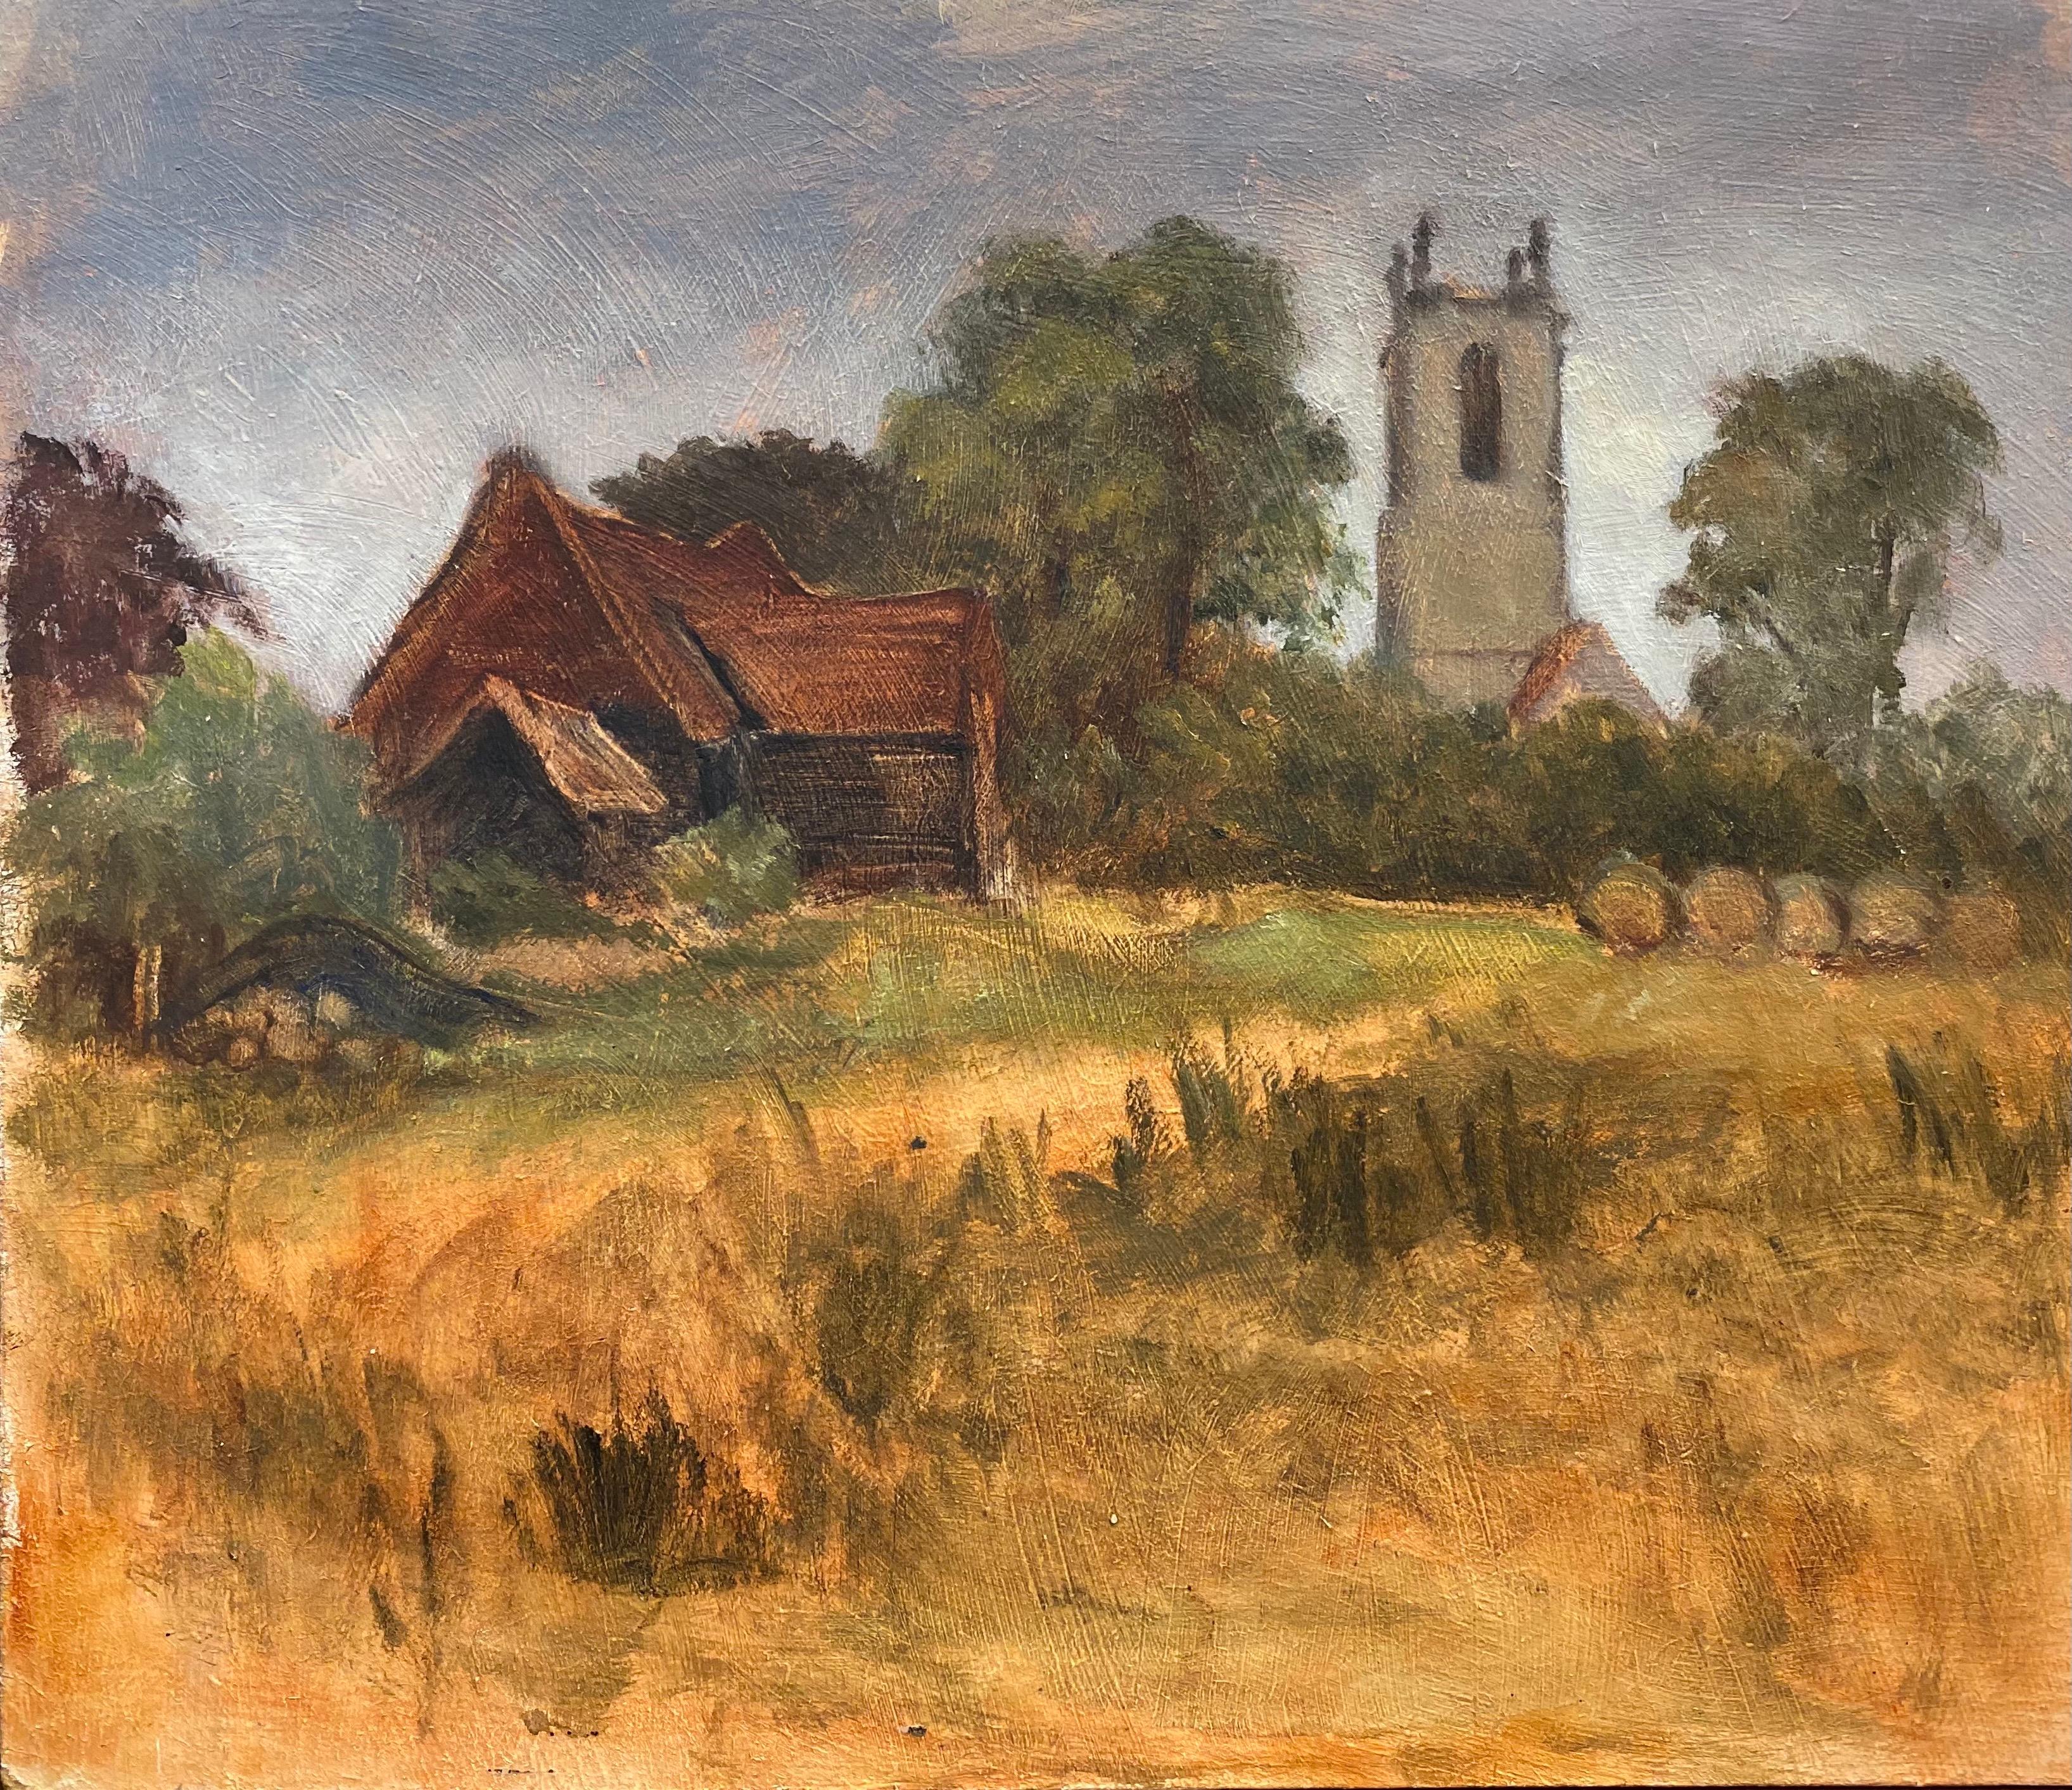 Barbera Doyle Landscape Painting - 1970's MODERN BRITISH OIL PAINTING - ENGLISH RURAL CHURCH Golden meadows